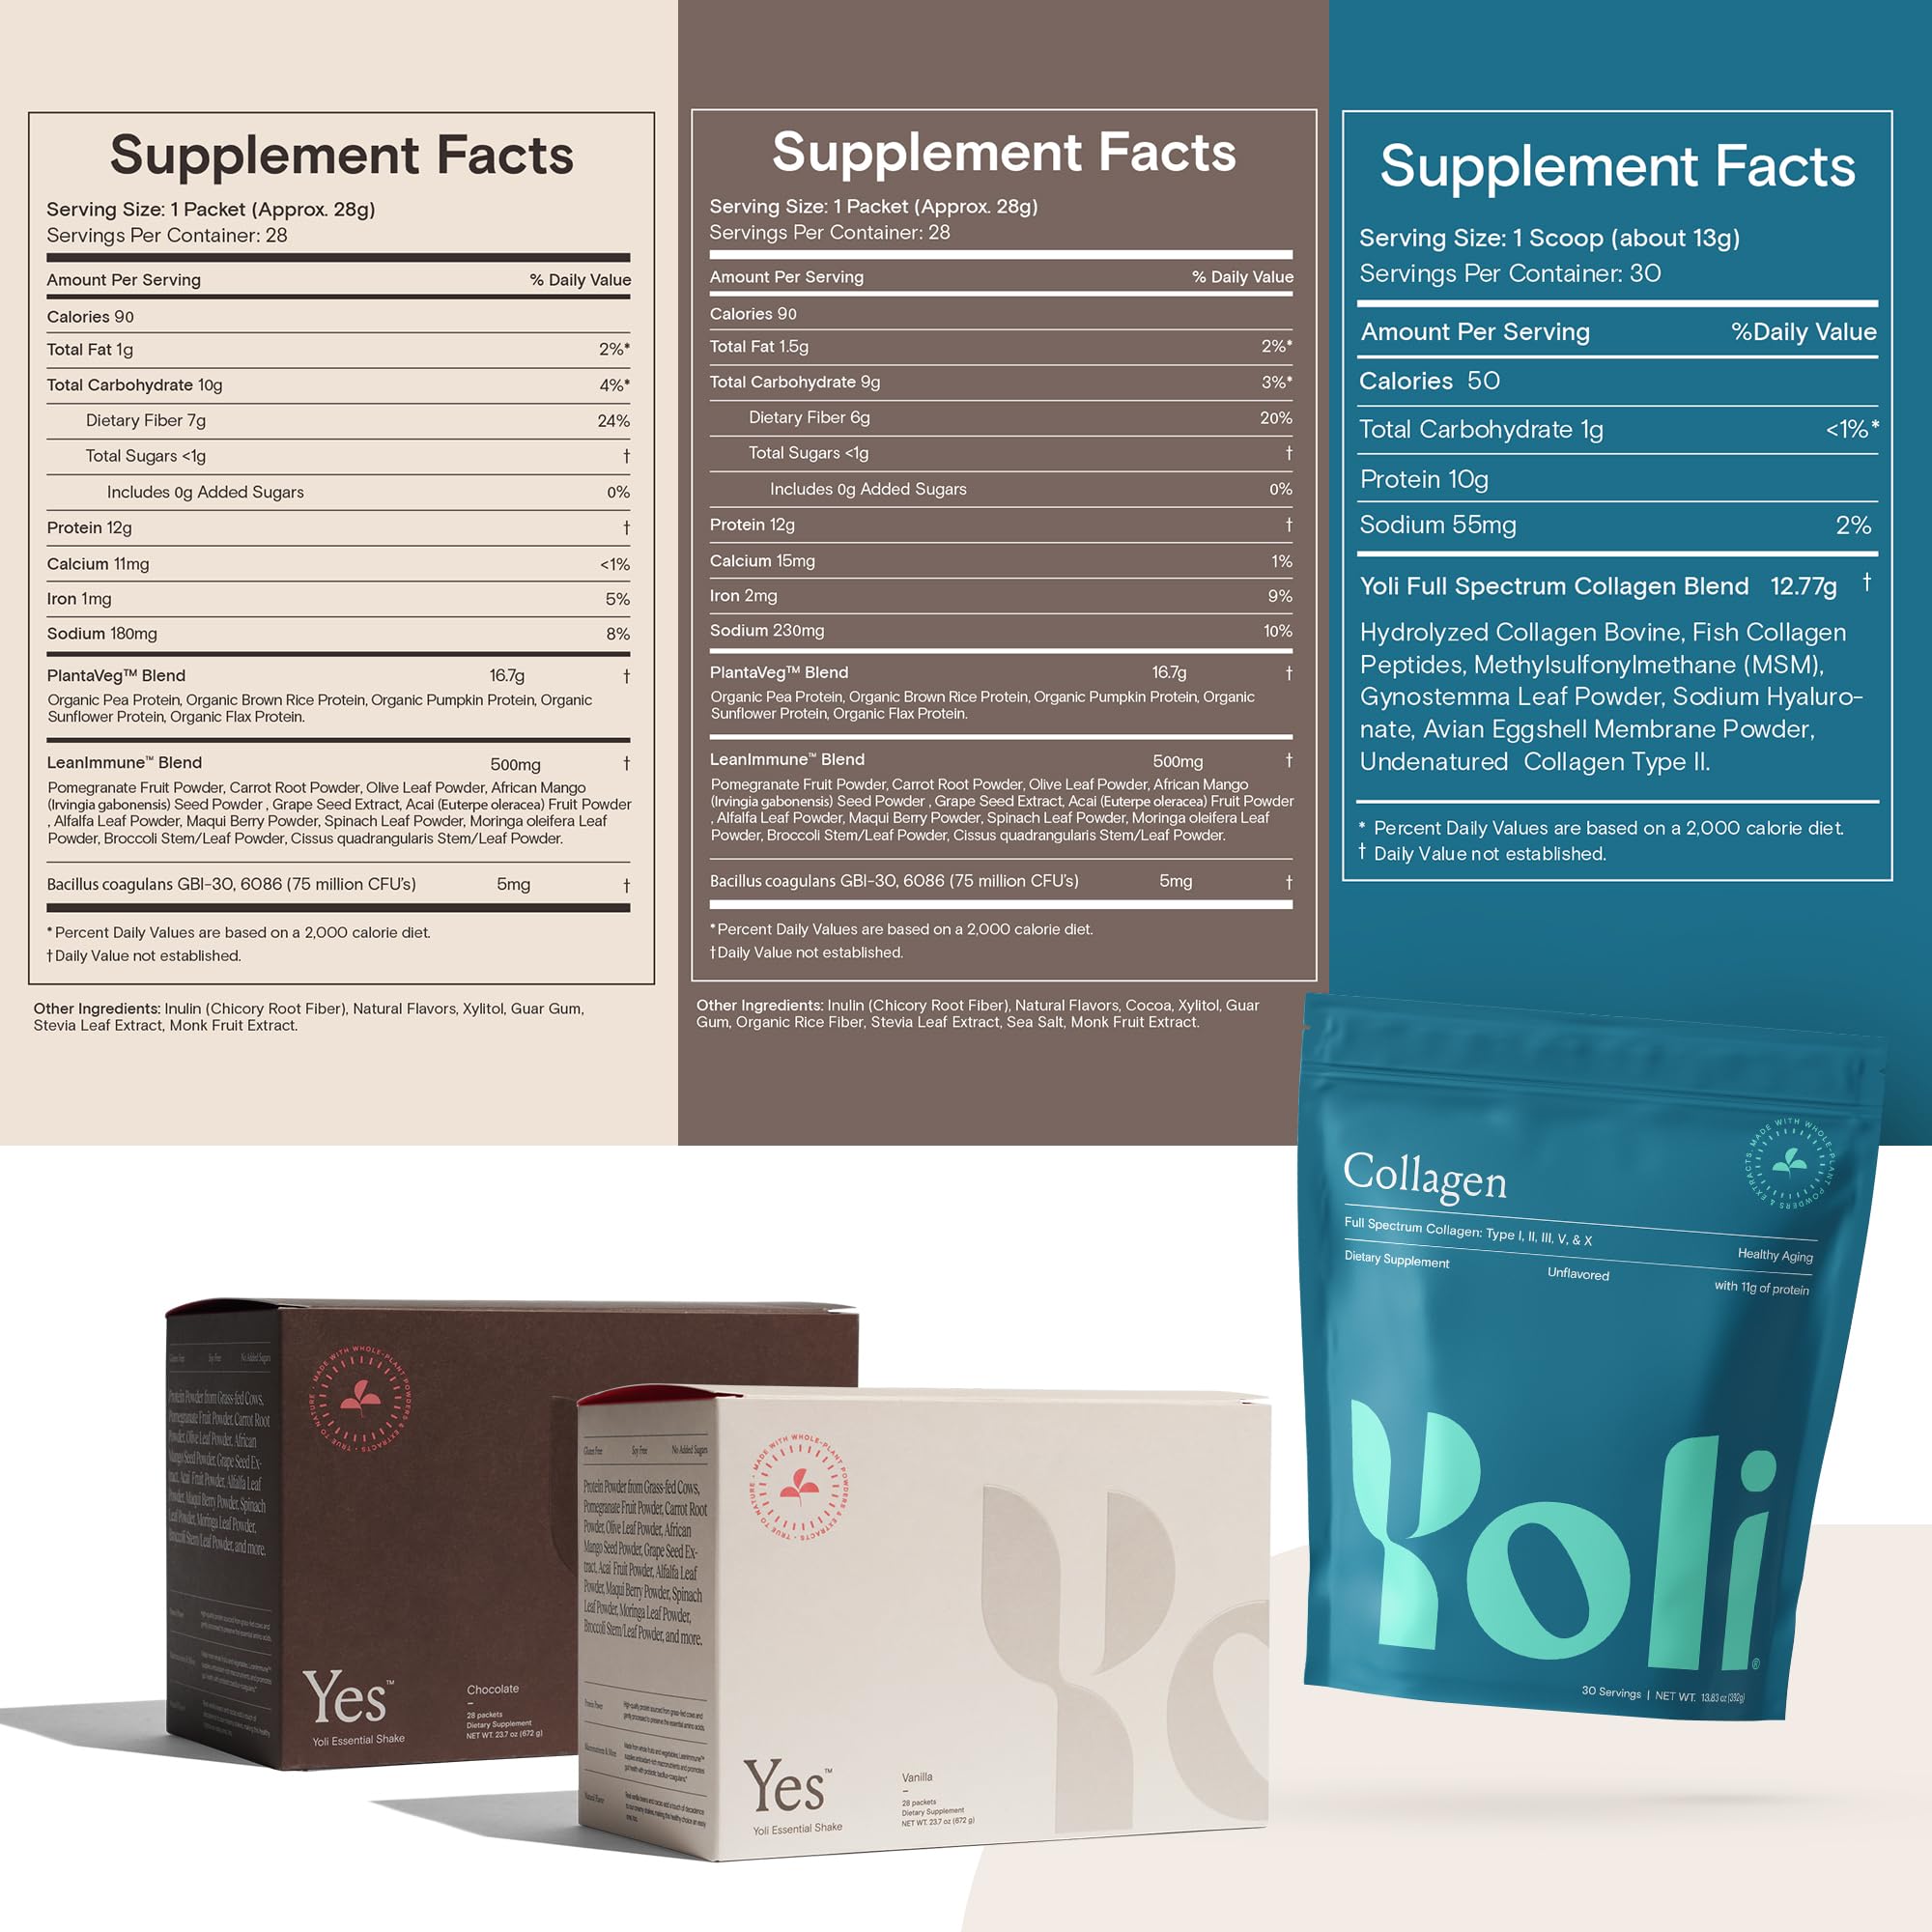 Yoli® Protein Bundle - YES Vegan Protein Powder and Collagen Powder - Lean Muscle and Collagen Production - for Healthy Muscles, Bones, Tendons and Cartilage